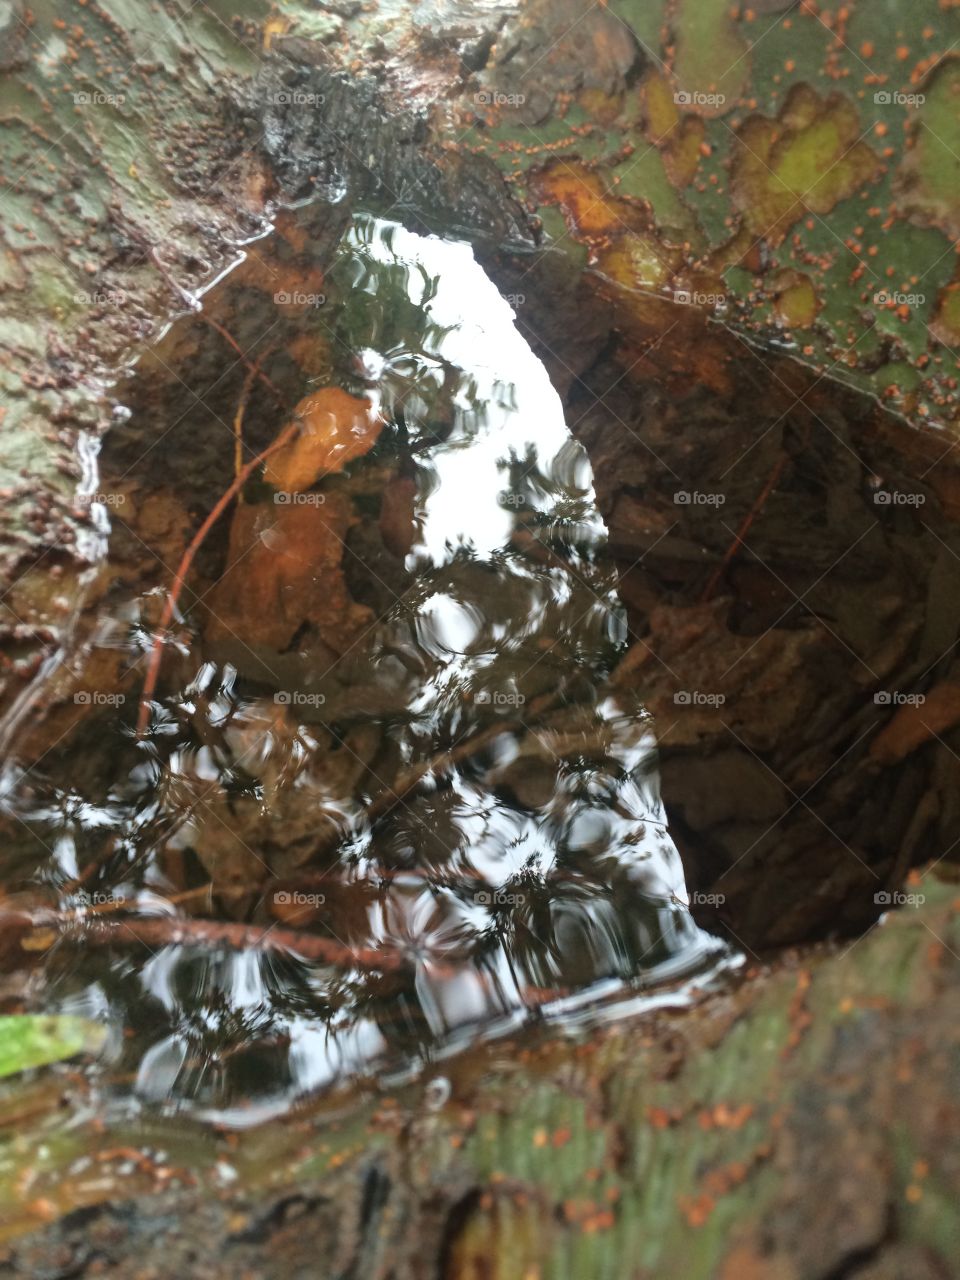 Pond within a tree